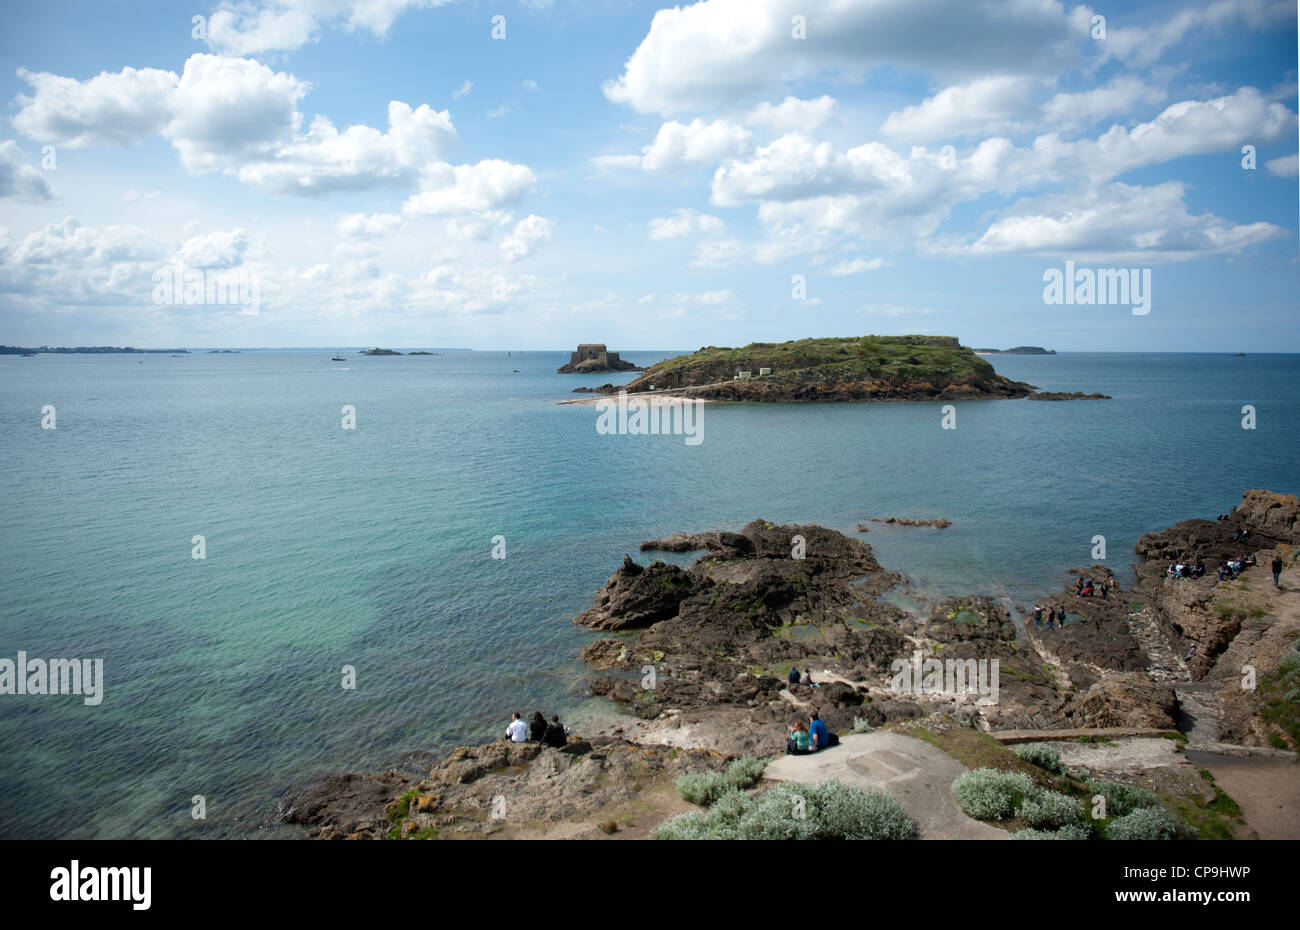 A cluster of rocky islands are located in the bay of Saint Malo in Ille-et-Villaine, Brittany, France Stock Photo